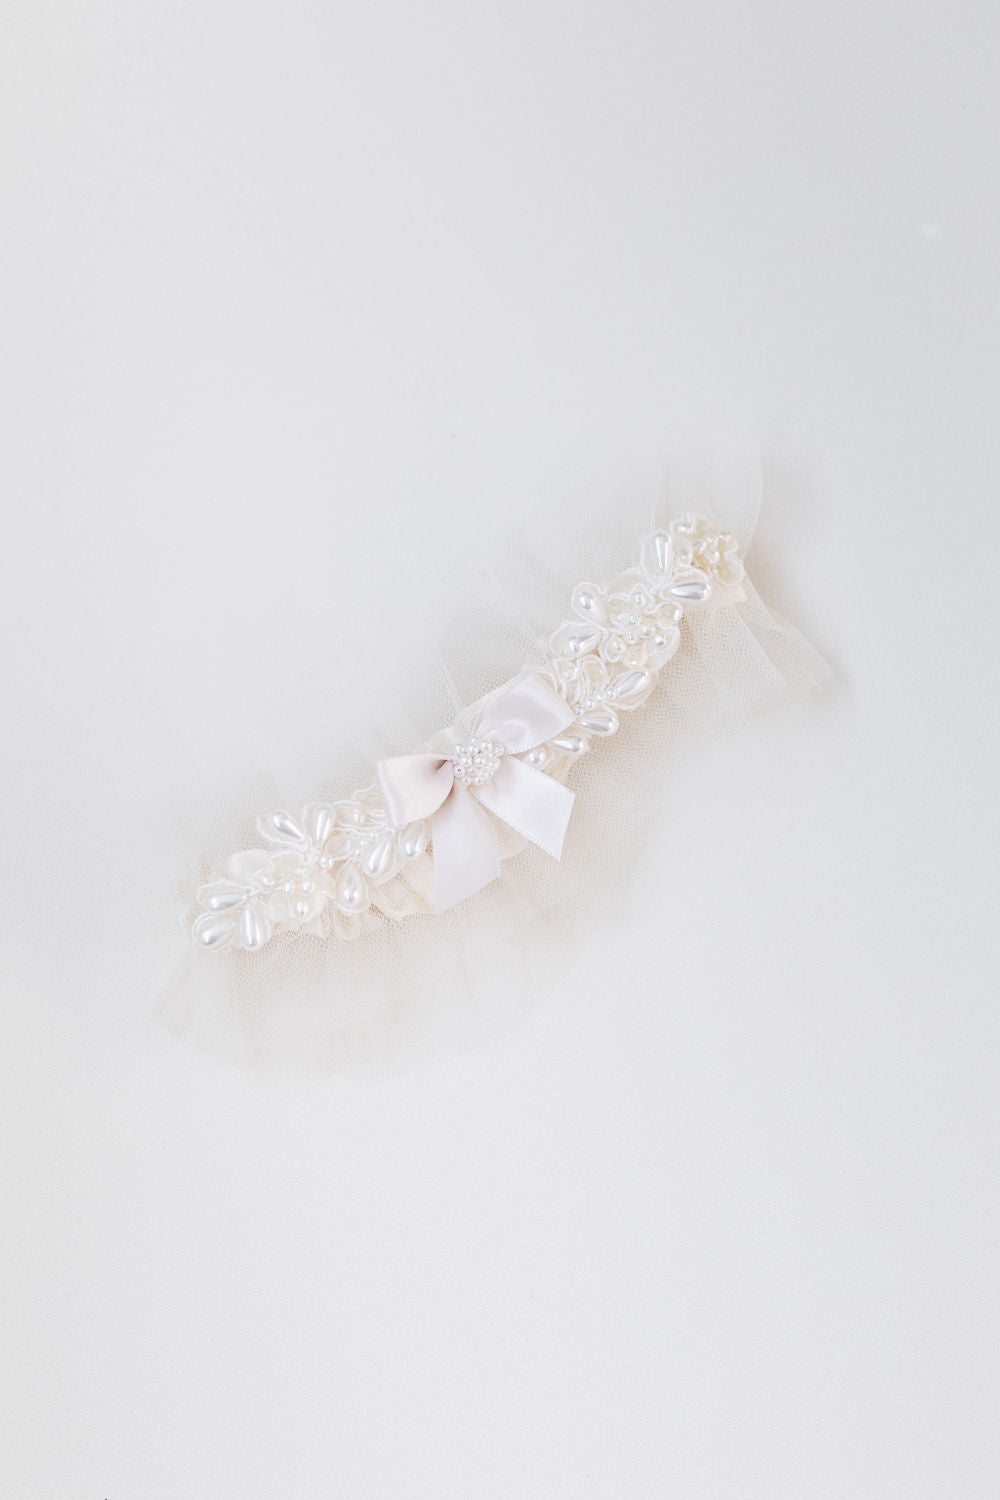 wedding garter with lace, tulle, and pearls from bride's mother's dress and personalized embroidery - a handmade wedding heirloom by The Garter Girl